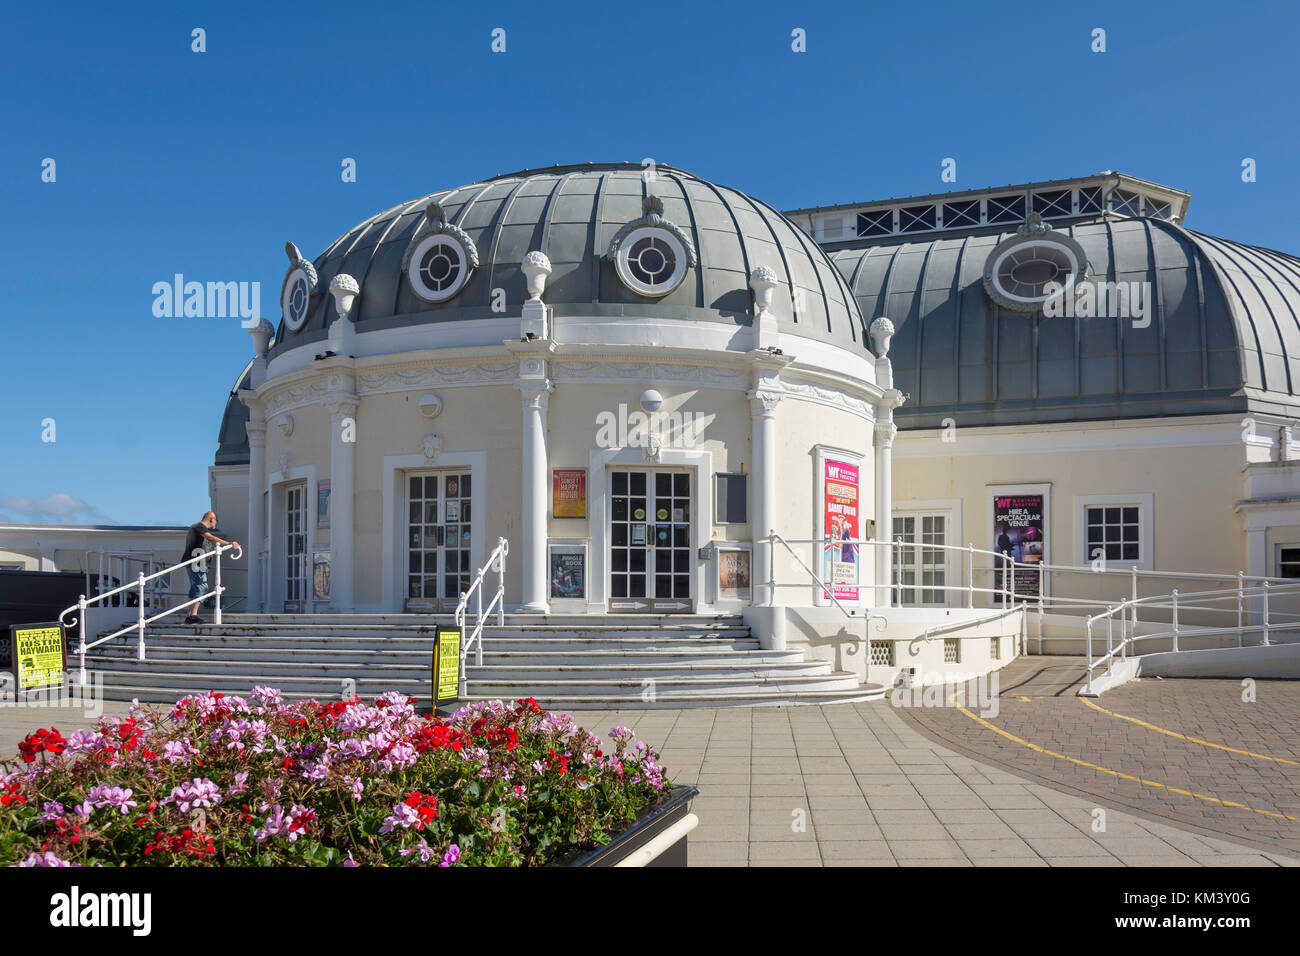 Royal Pavilion Theatre, Marine Parade, Worthing, West Sussex, Angleterre, Royaume-Uni Banque D'Images